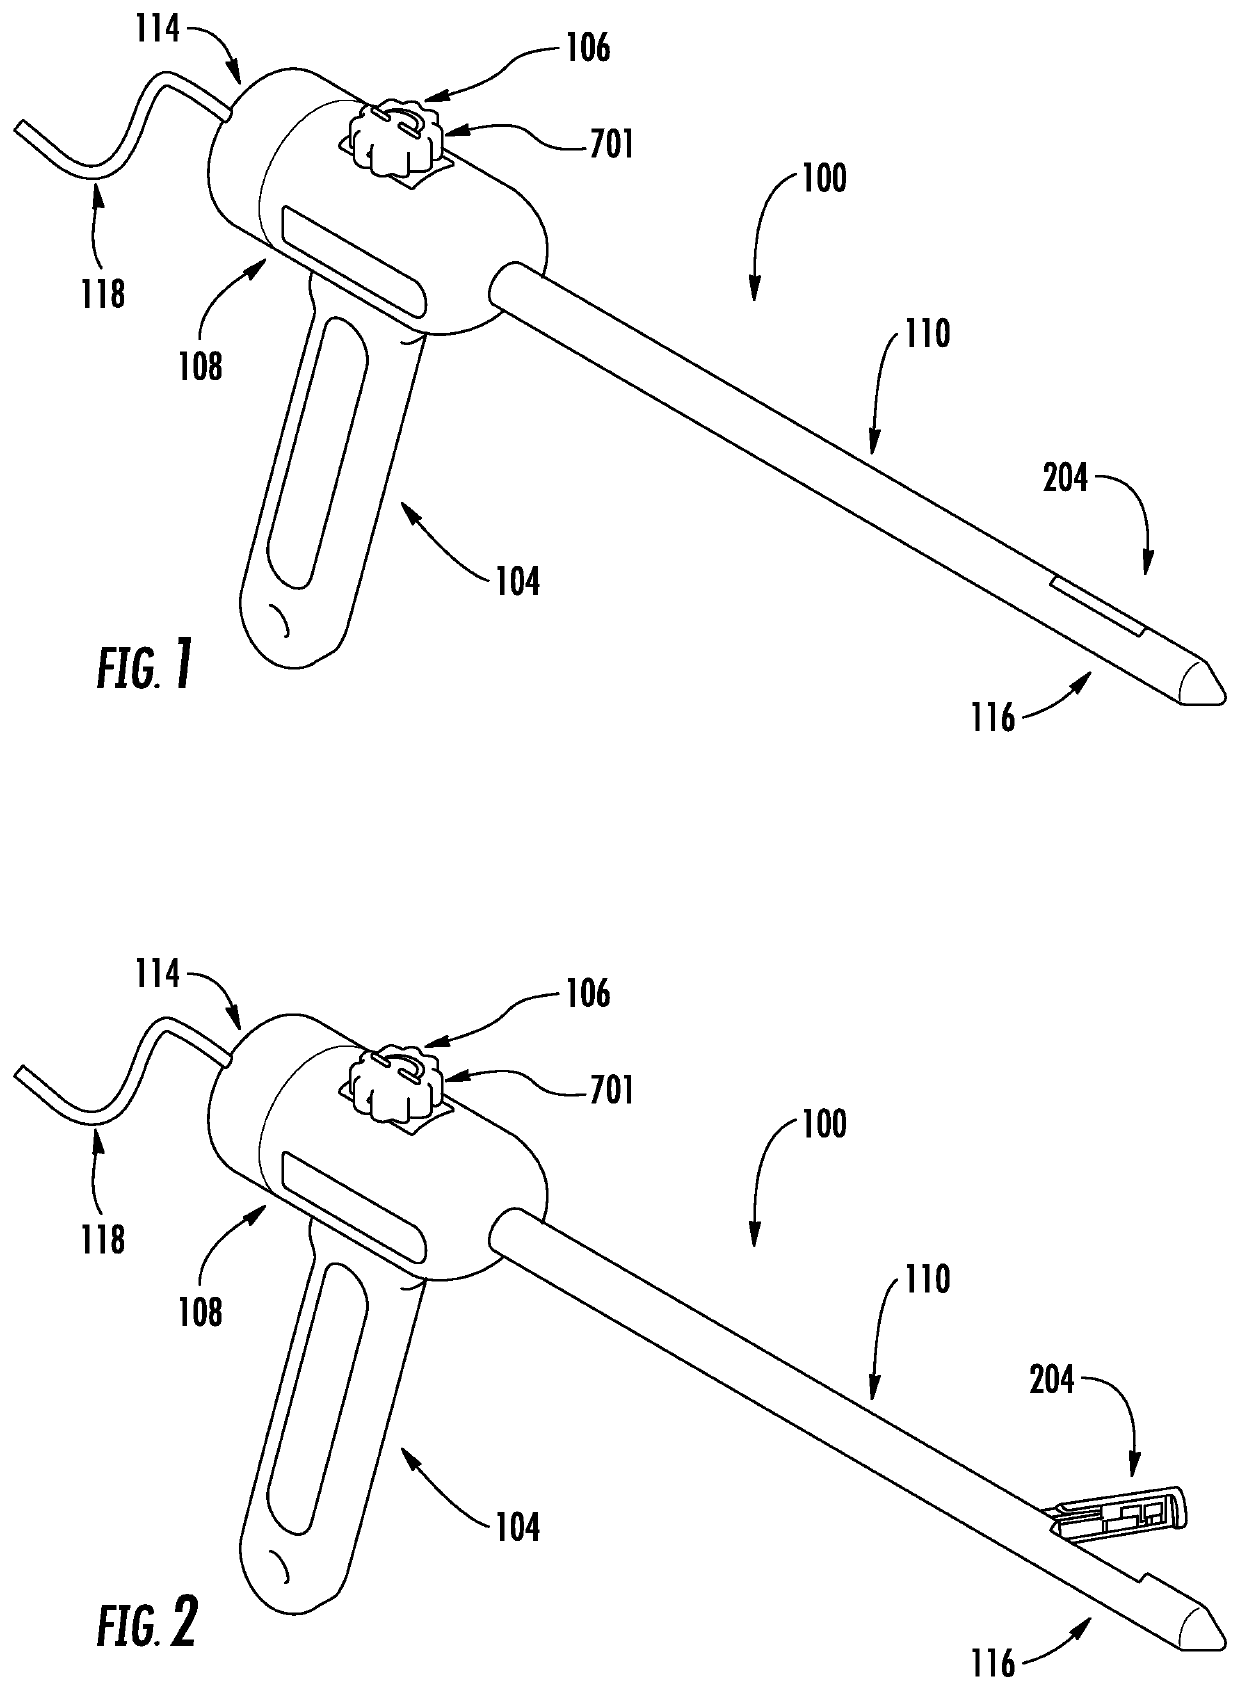 Cannula assembly with deployable camera